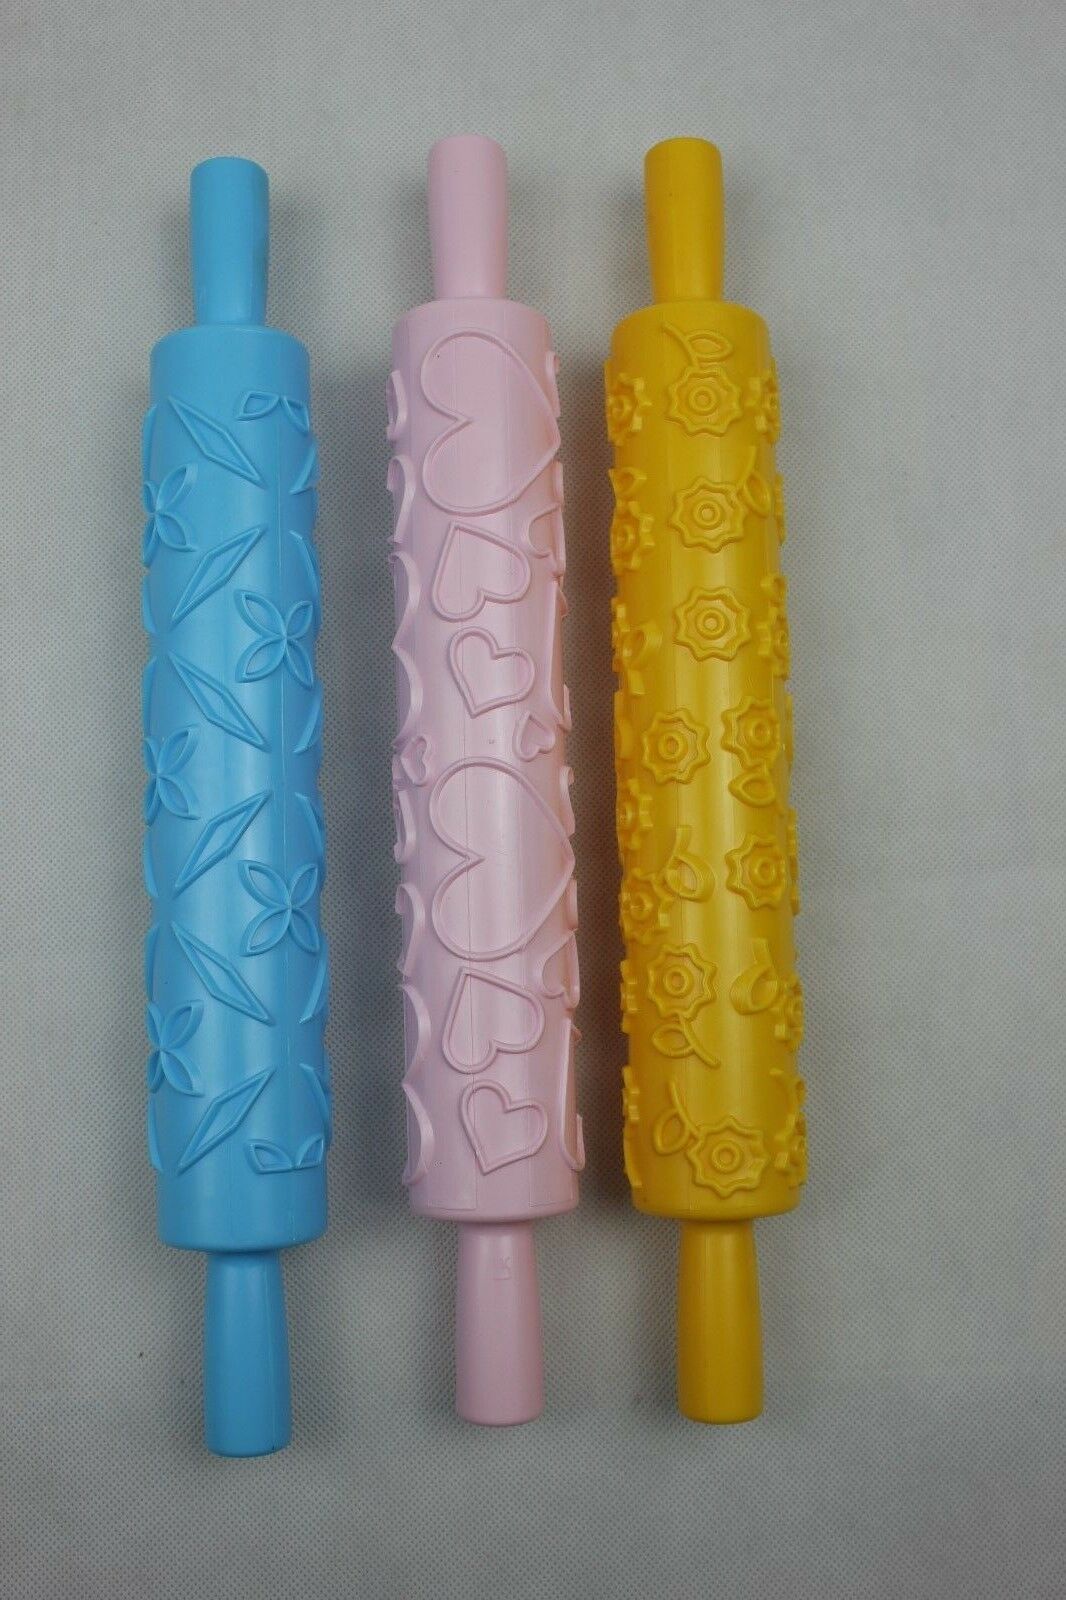 3 x Large Embossed Rolling Pin Patterned Texture Cake Decorating Pastry Tool S4